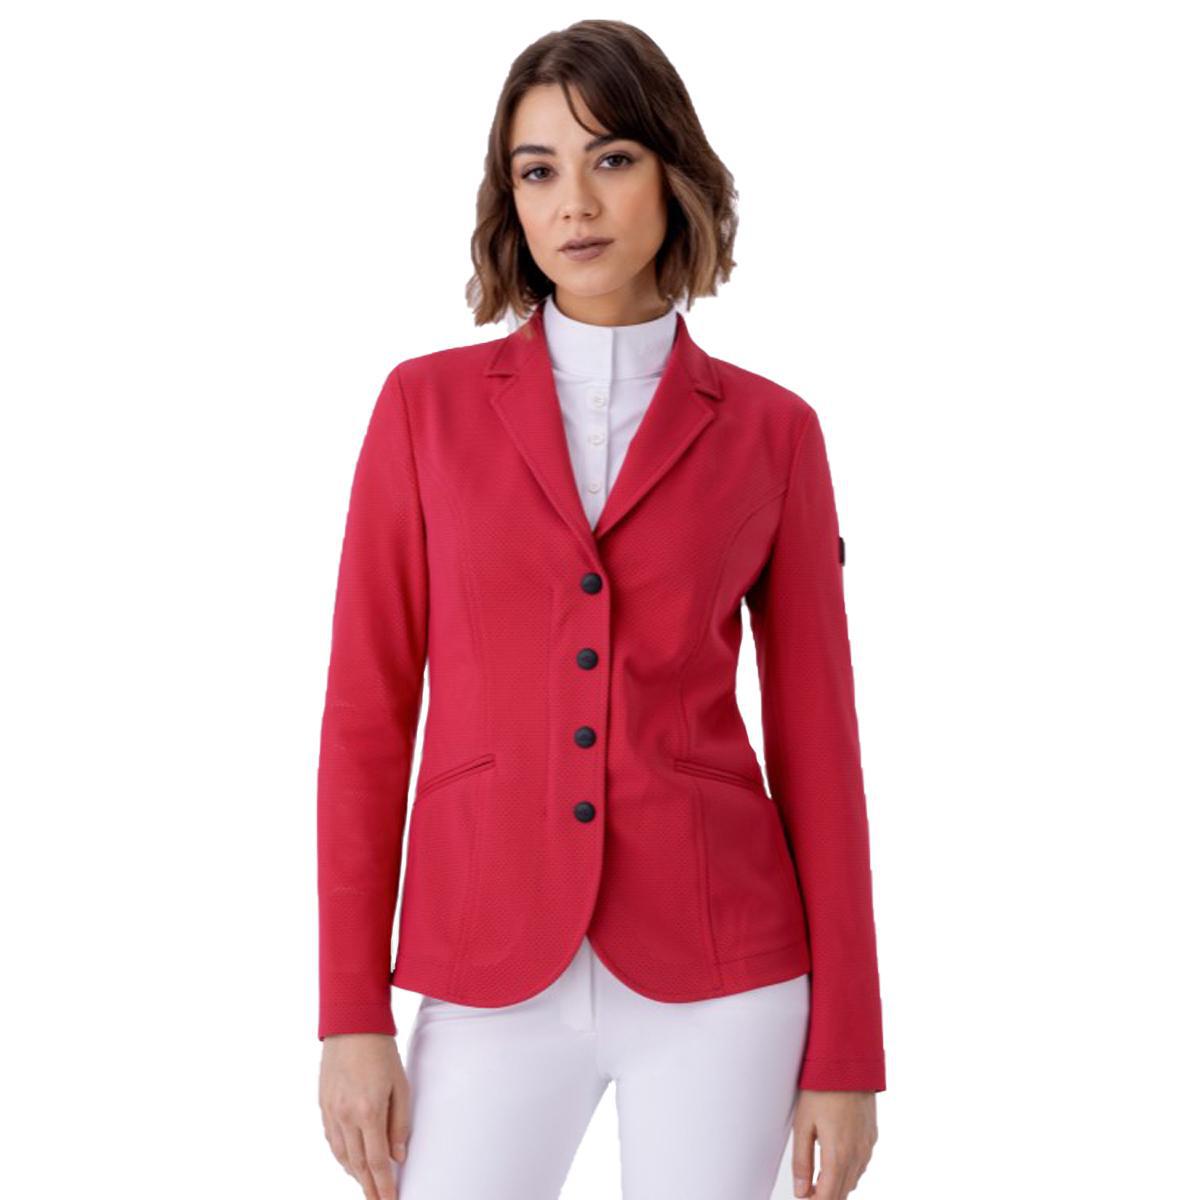 Equiline Women's CozyC Competition Jacket